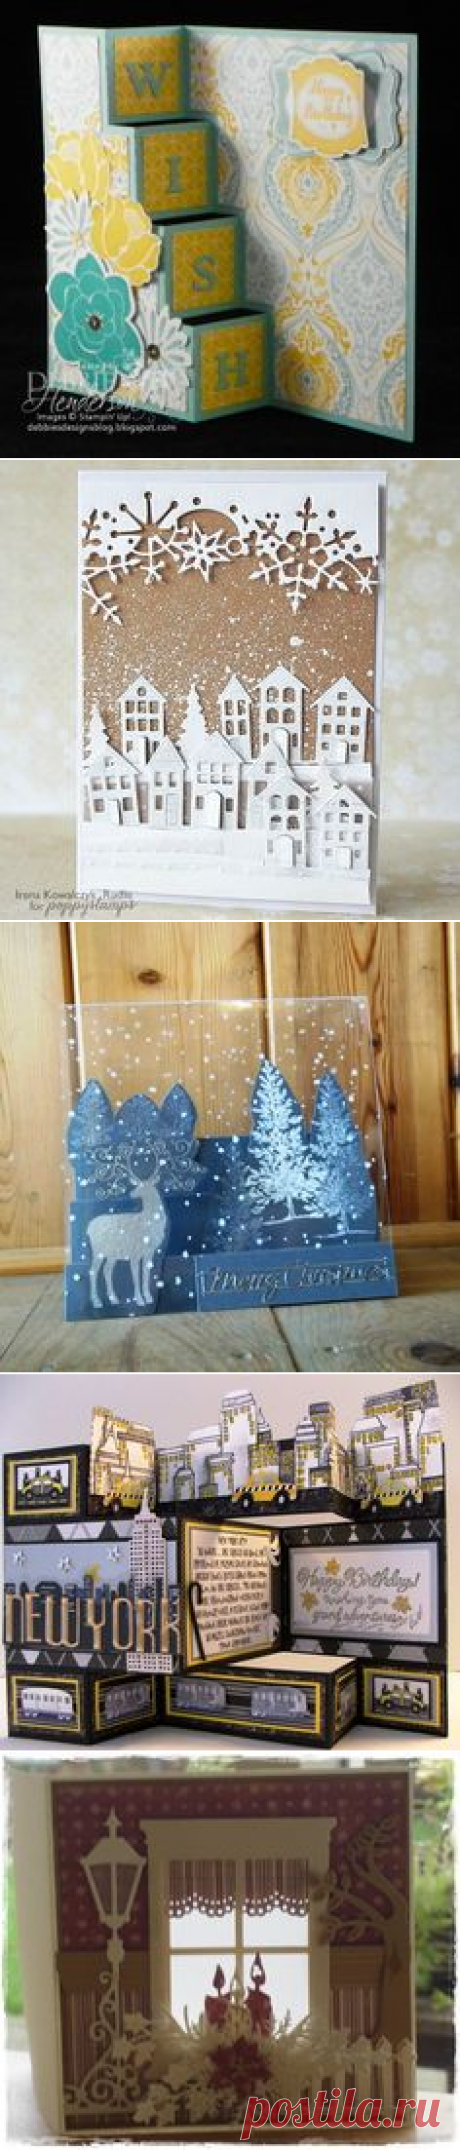 (21) handmade acetate cards - Google Search | Cards of Pinterest!